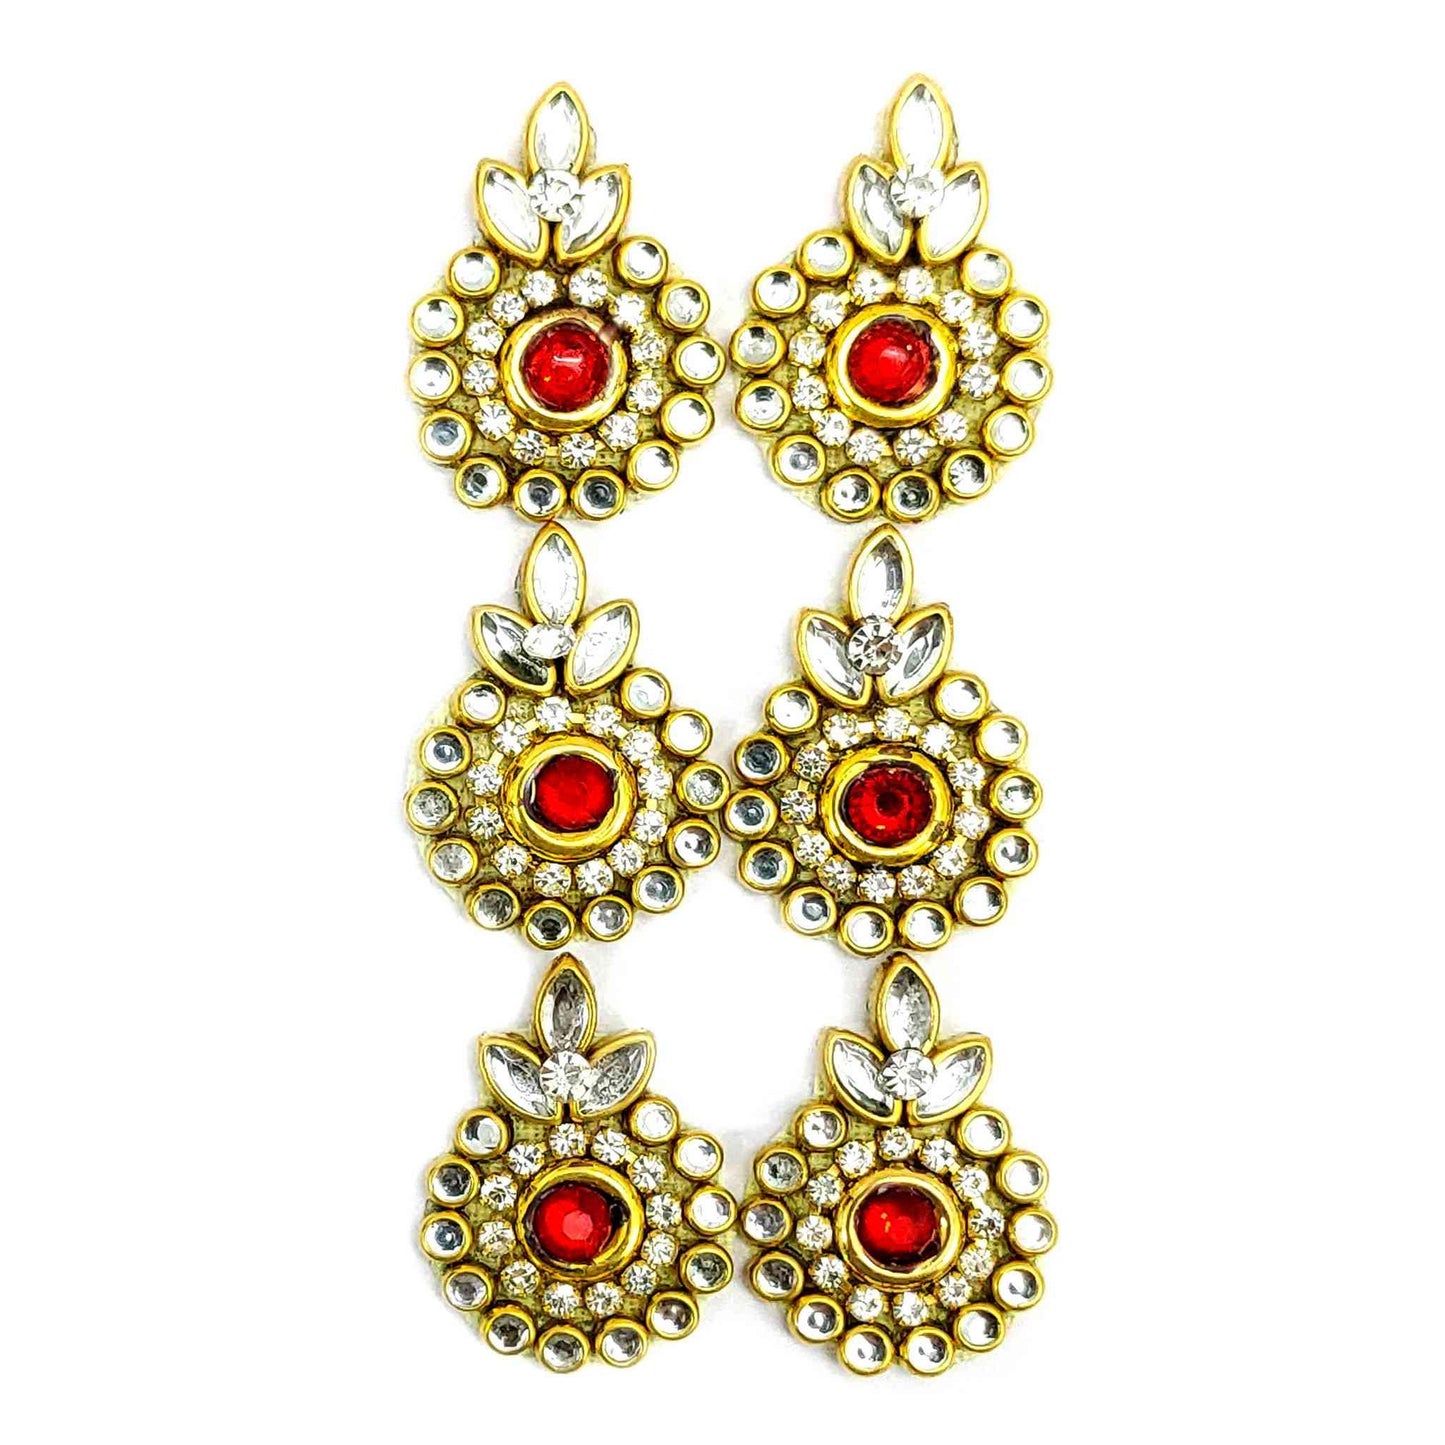 Rhinestones stuuded Tilak Buti for DIY Craft, Trousseau Packing or Decoration (Bunch of 12) - Design 243, Red - Indian Petals